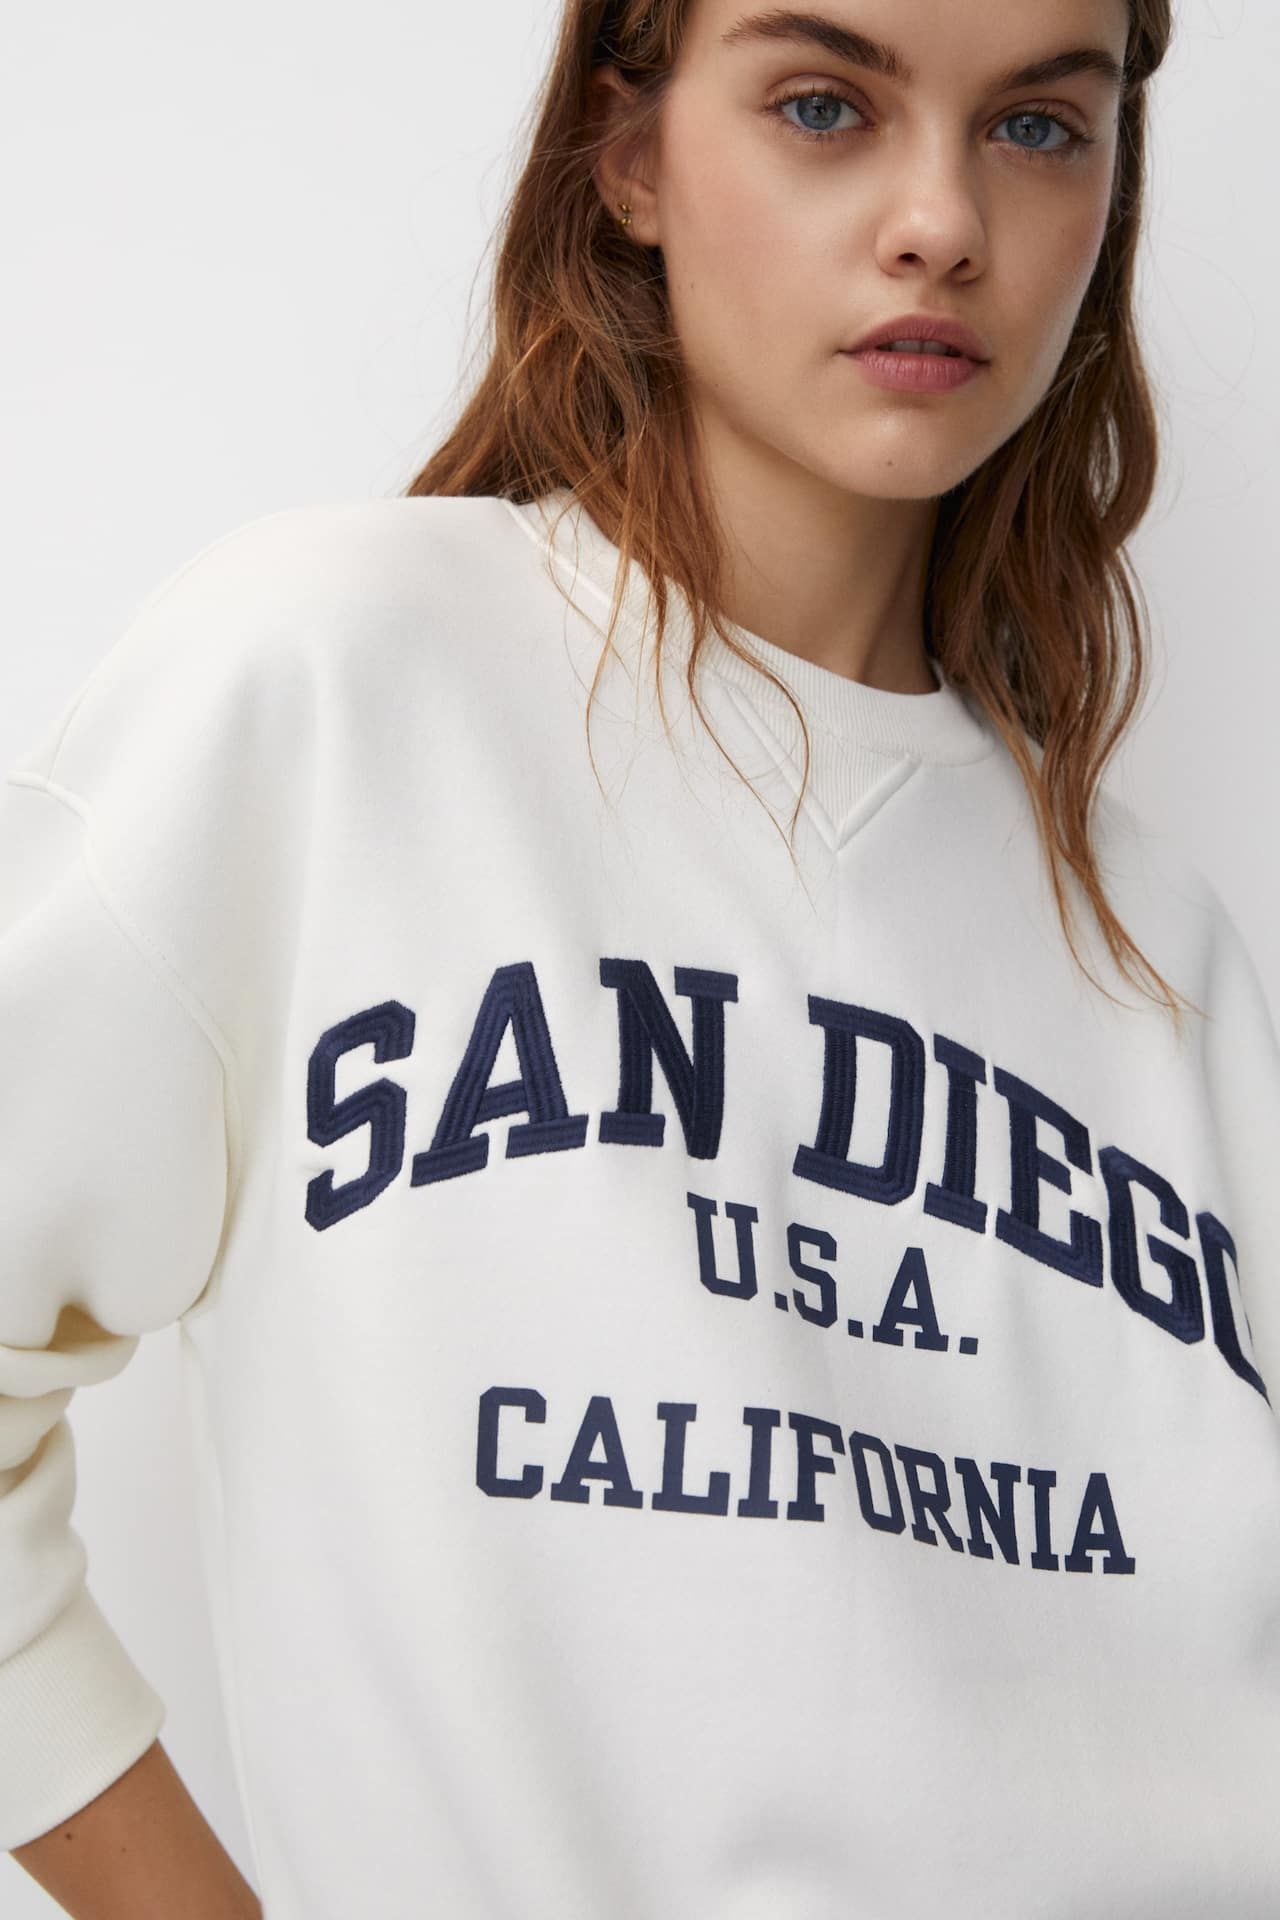 Varsity-style sweatshirt with an embroidered slogan | PULL and BEAR UK